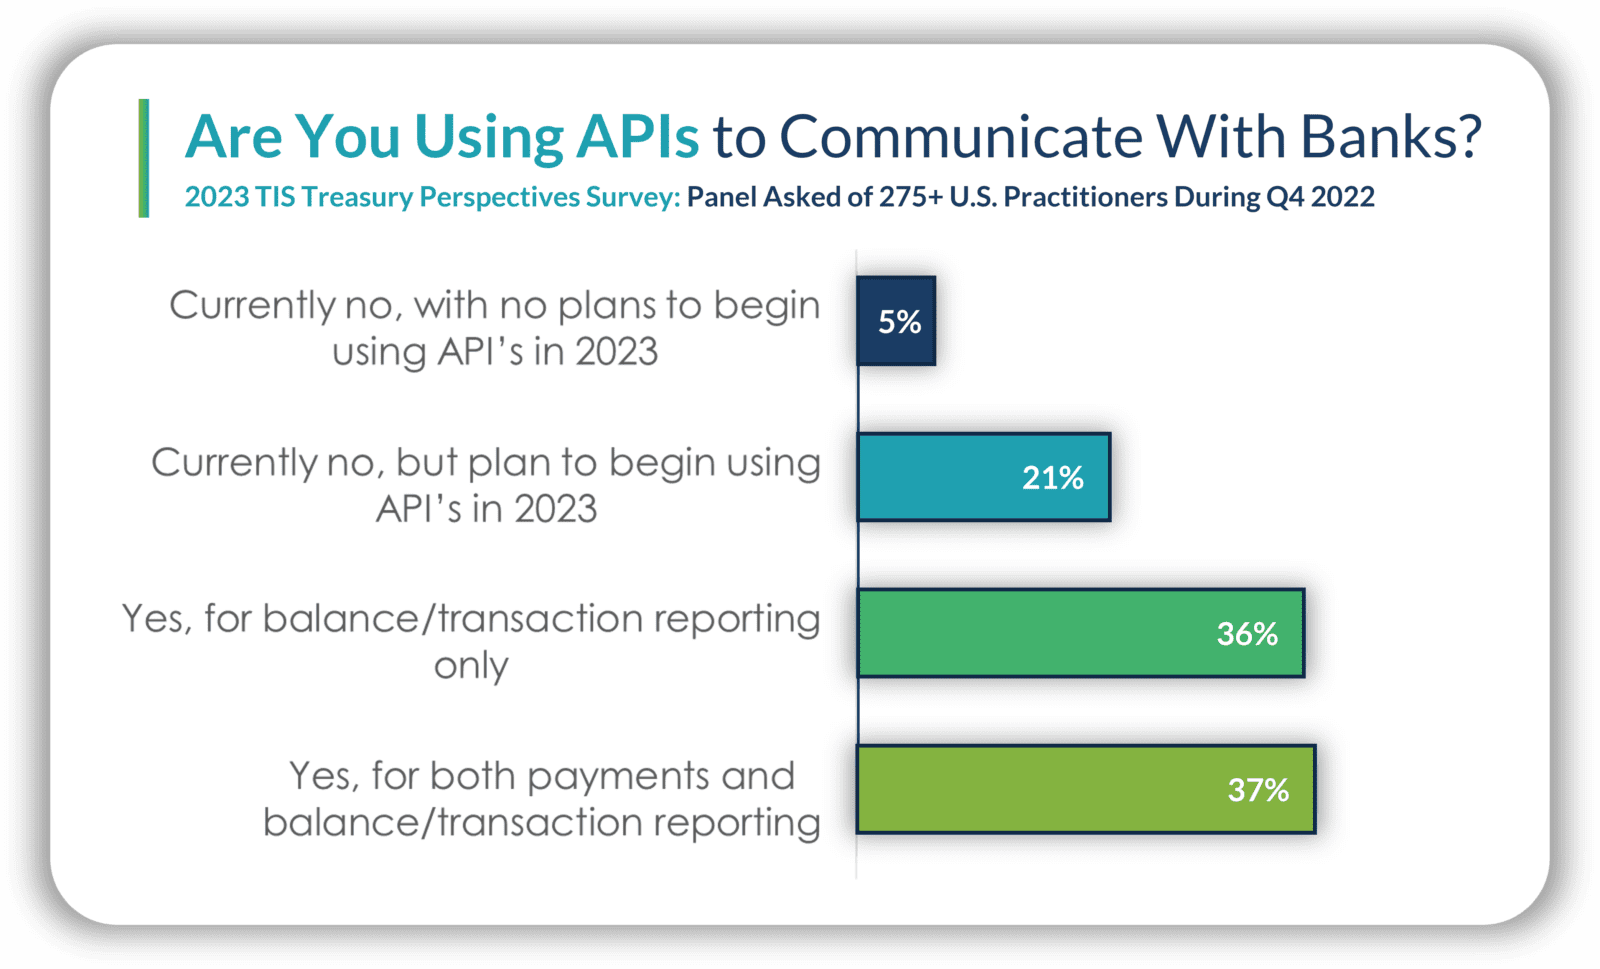 Treasury, Finance, and CFO usage of APIs to communicate with banks in the U.S.